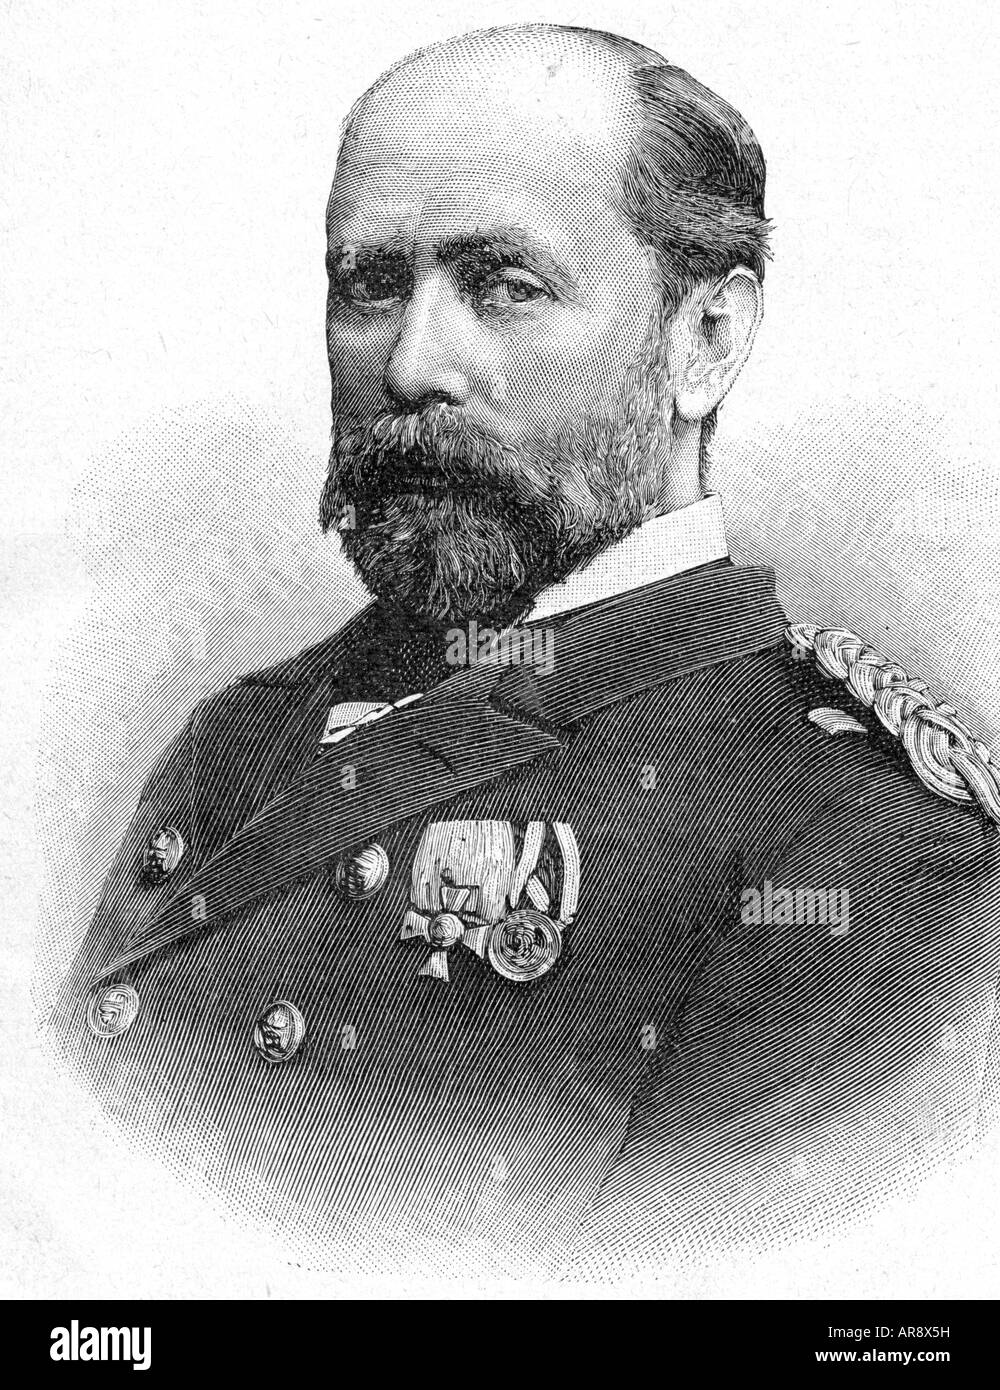 Diederichs, Otto von, 7.9.1843 - 8.3.1918, German admiral, commander of the East Asia Squadron 1897 - 1899, portrait, wood engraving, 1898, , Stock Photo